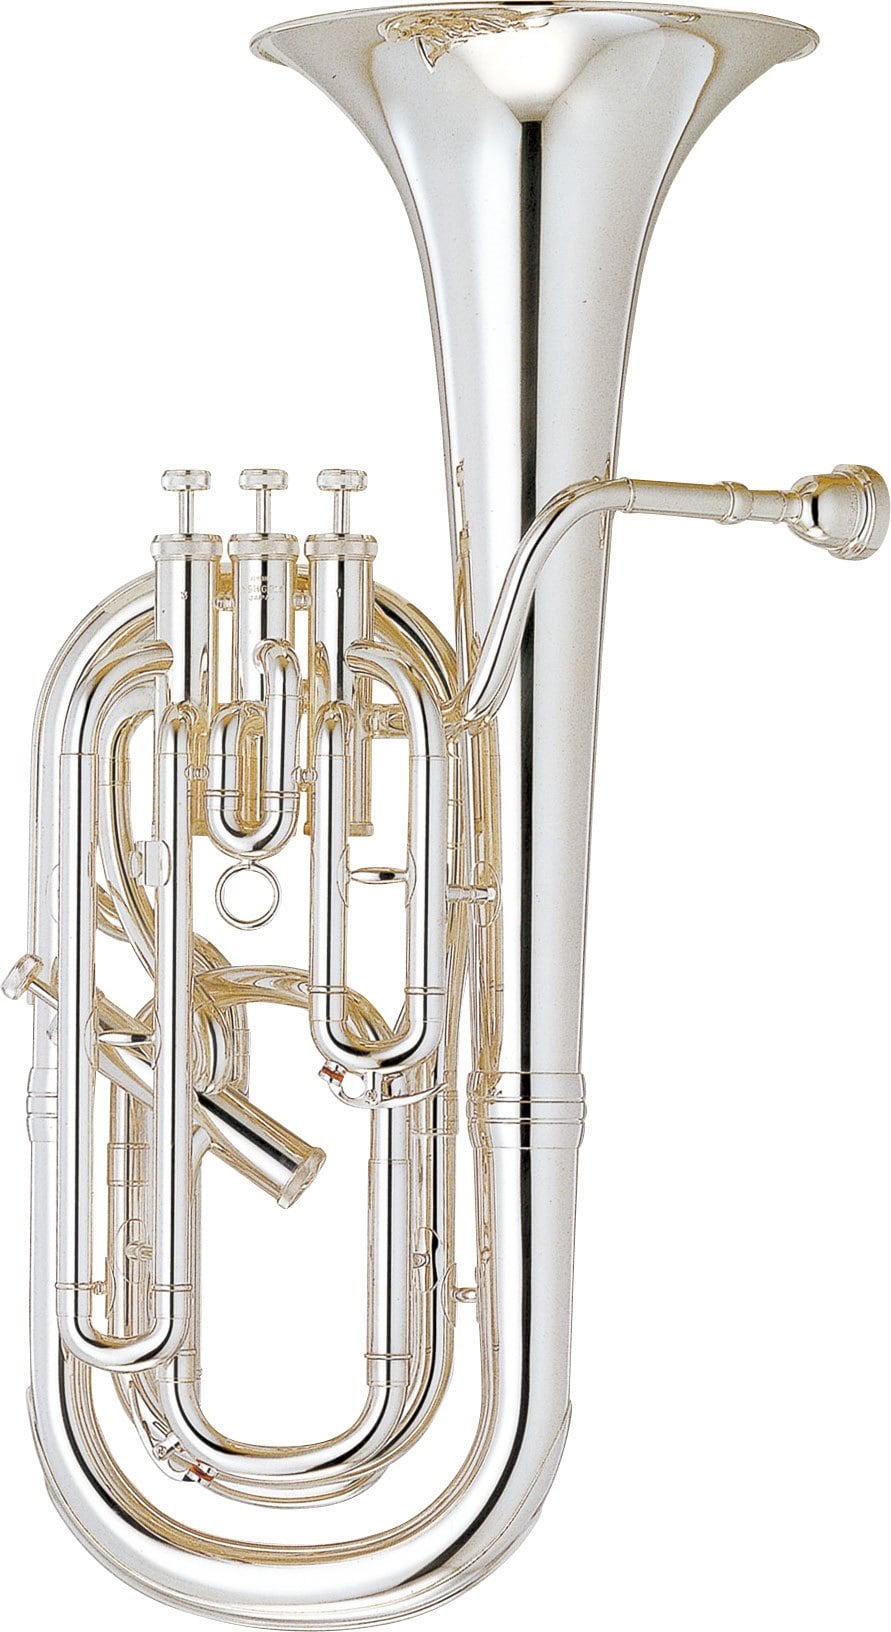 YBH-621S - Overview - Baritone Horns - Brass & Woodwinds - Musical 